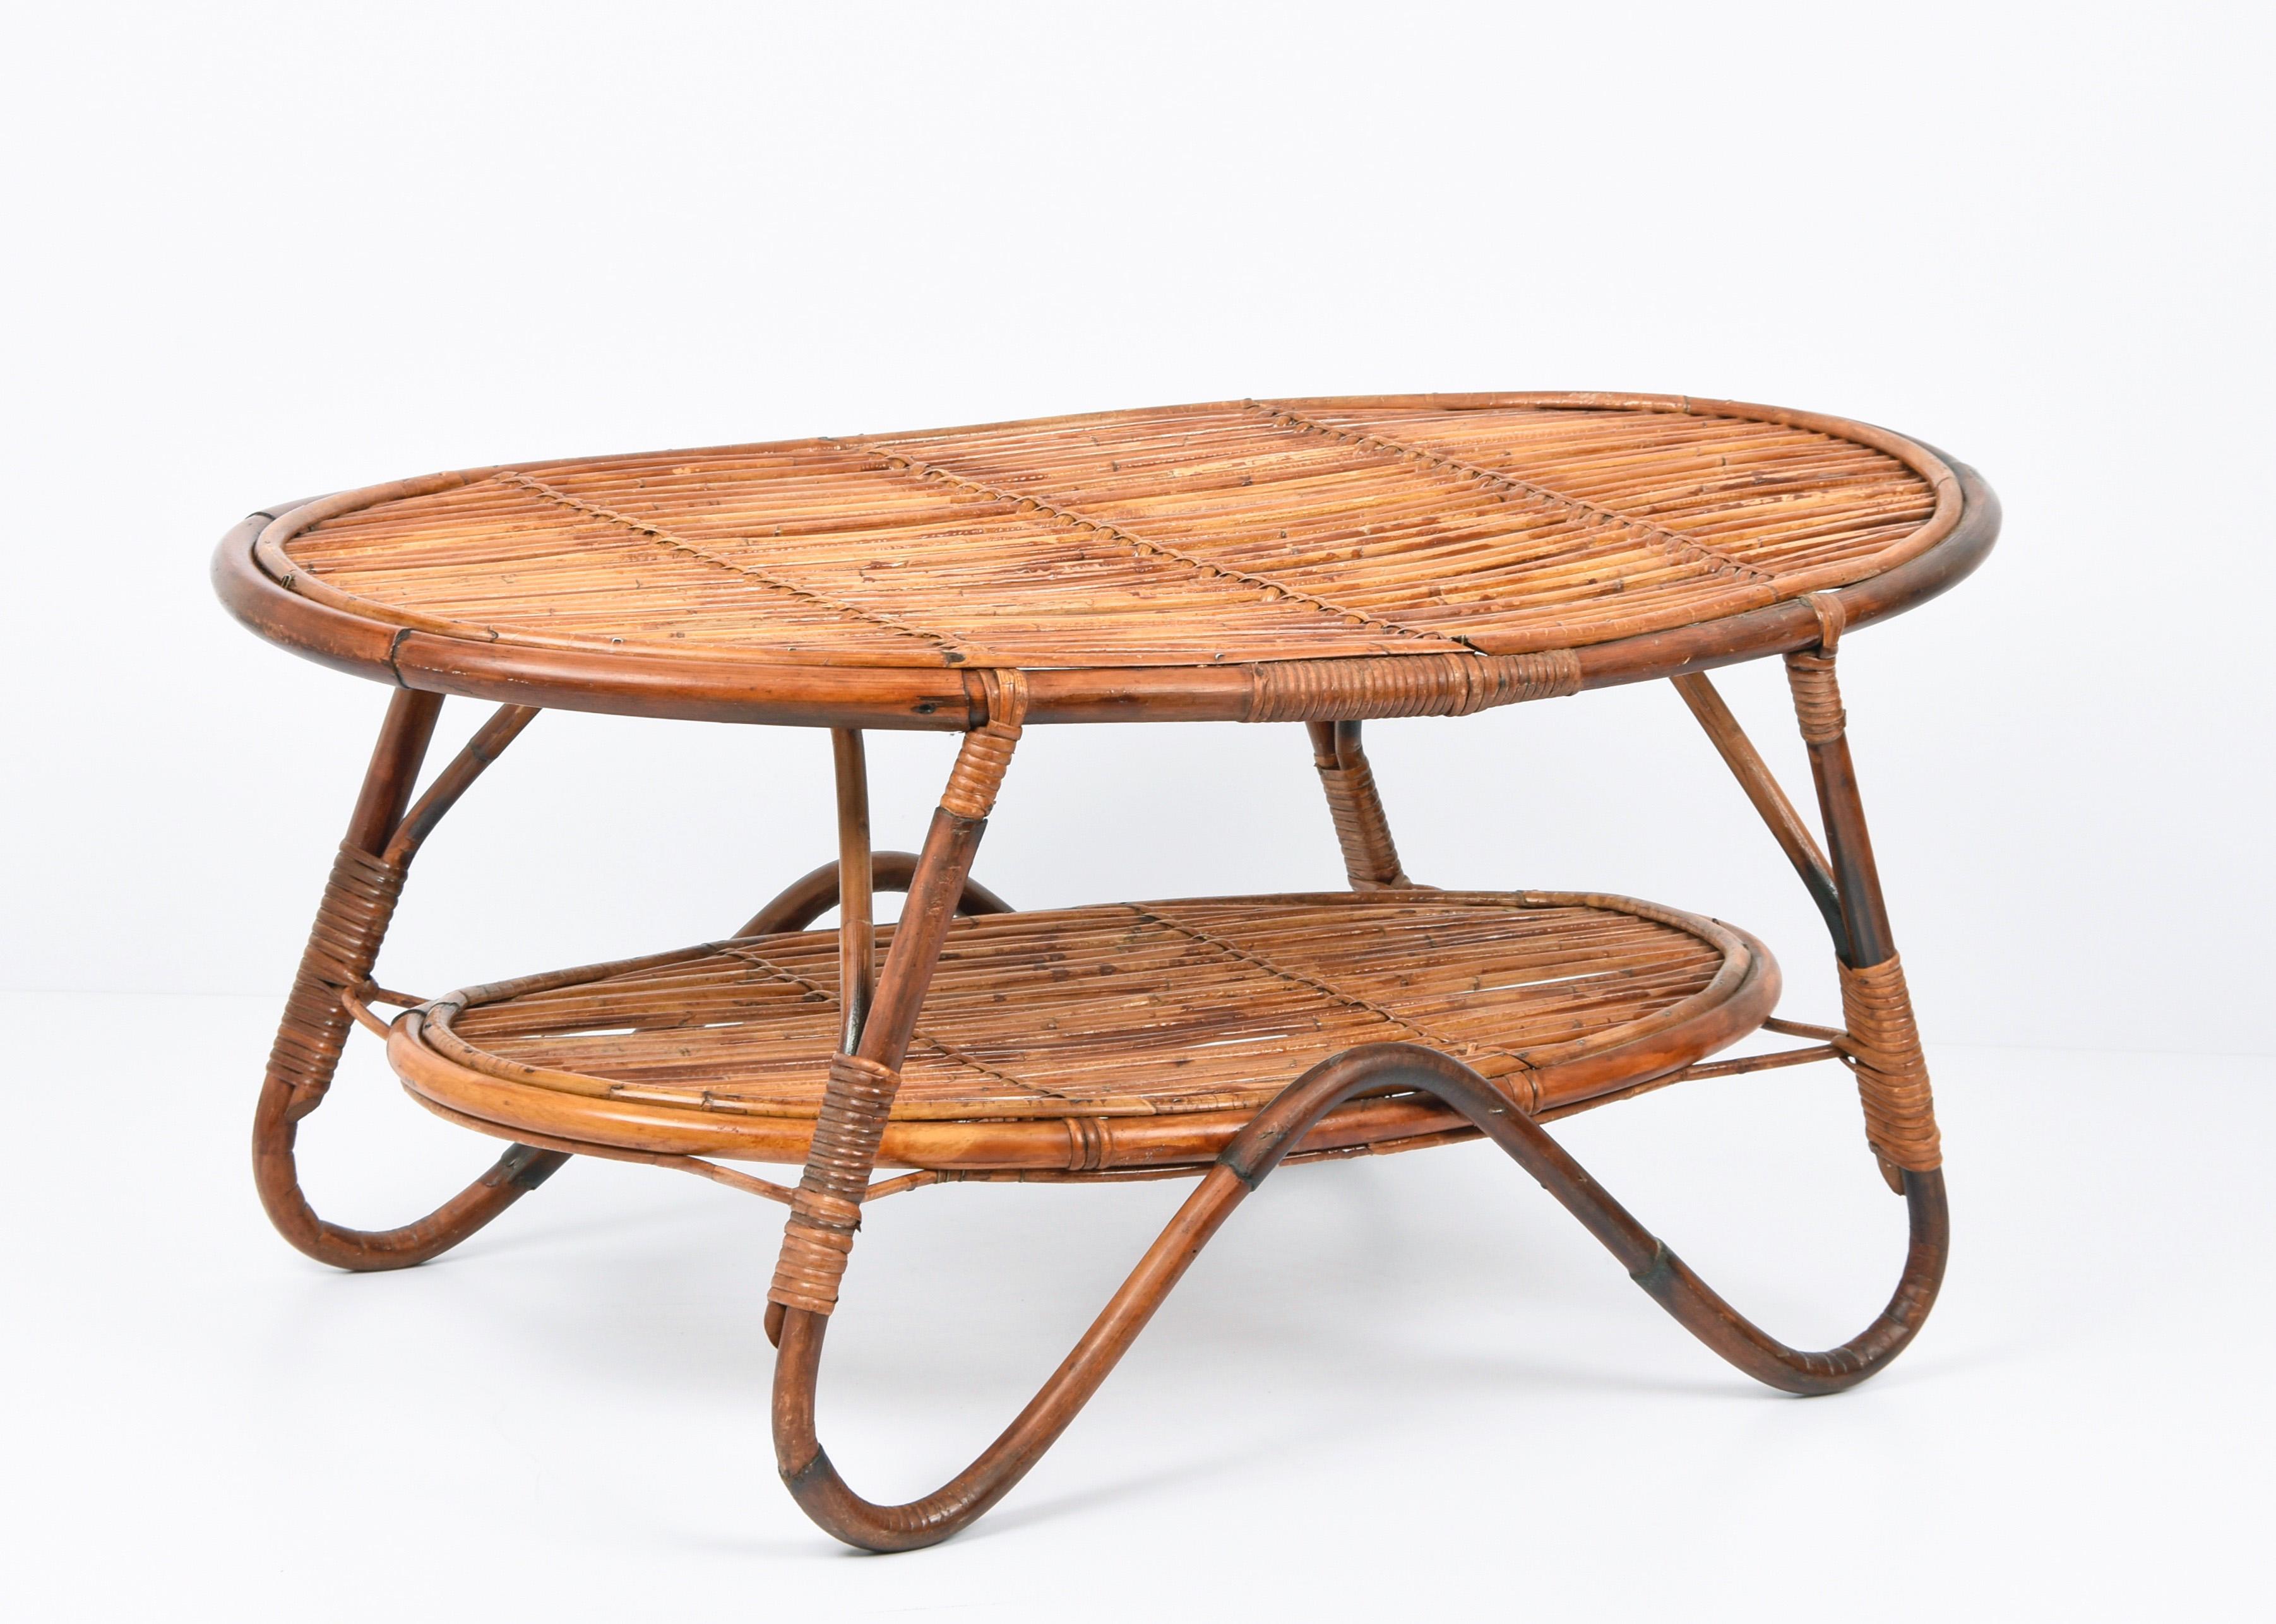 Midcentury Italian Oval Rattan and Bamboo Two Levels Coffee Table, 1950s For Sale 3